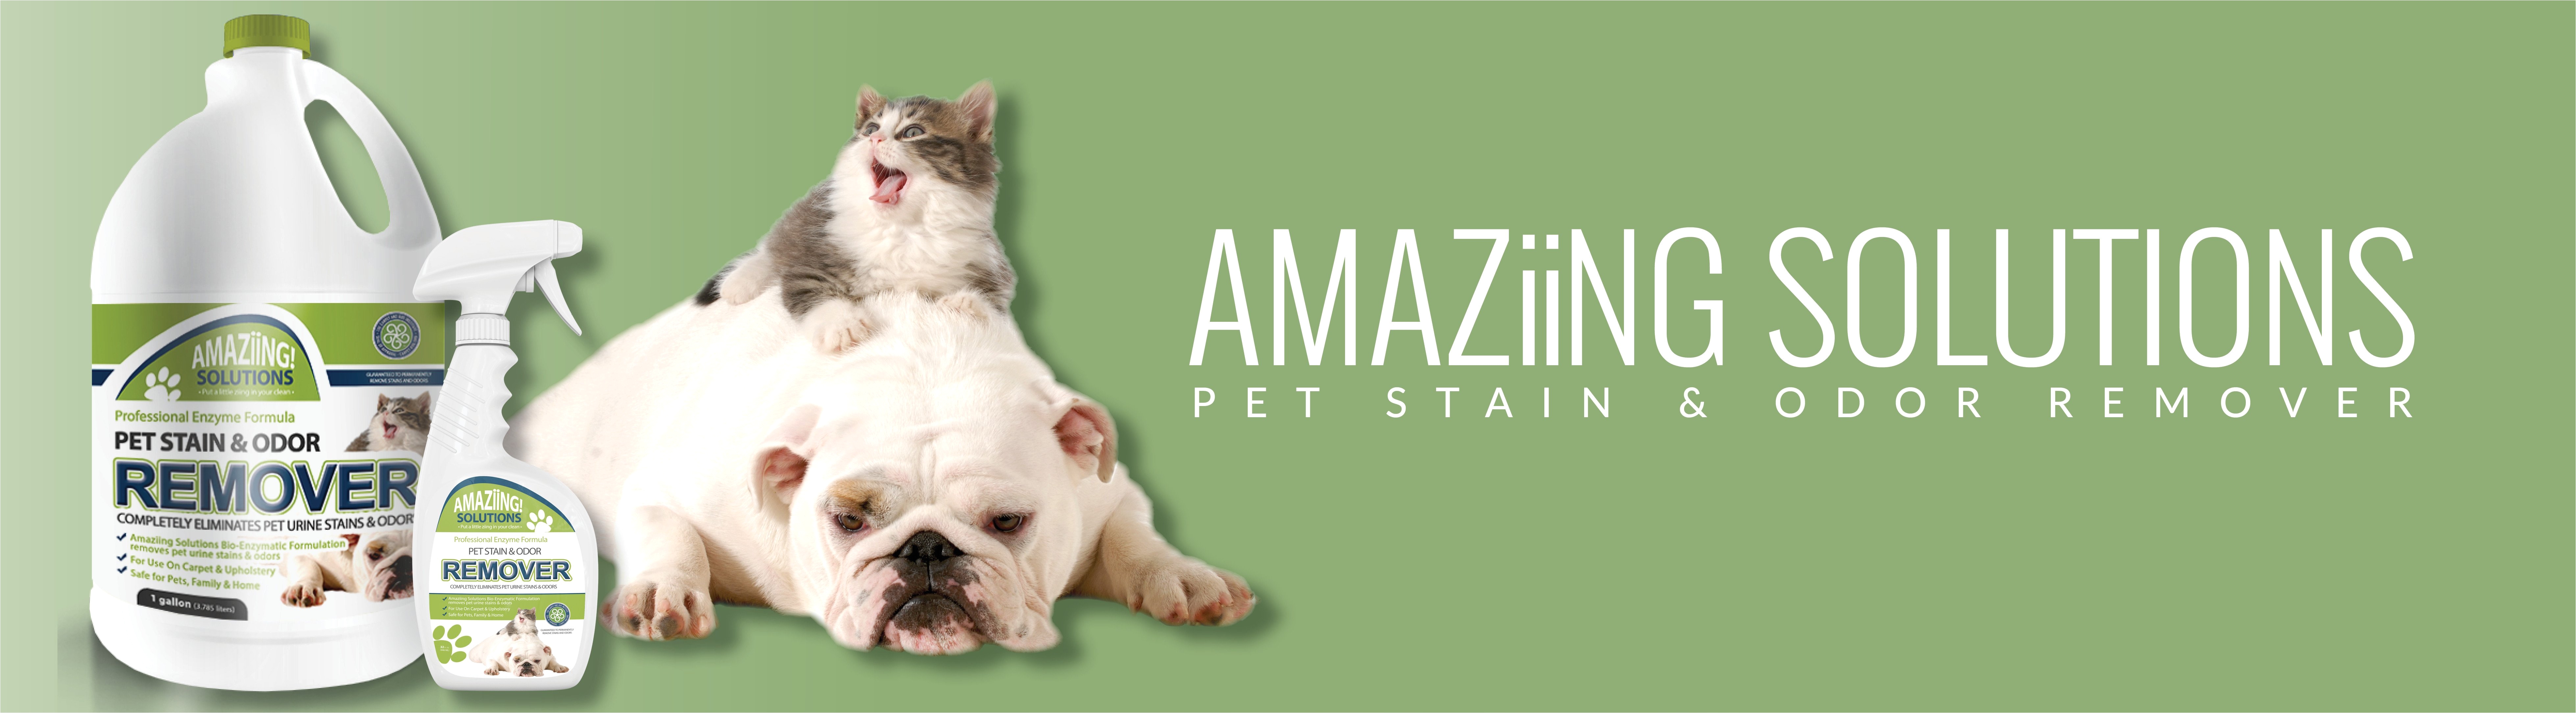 amaziing solutions pet stain odor remover